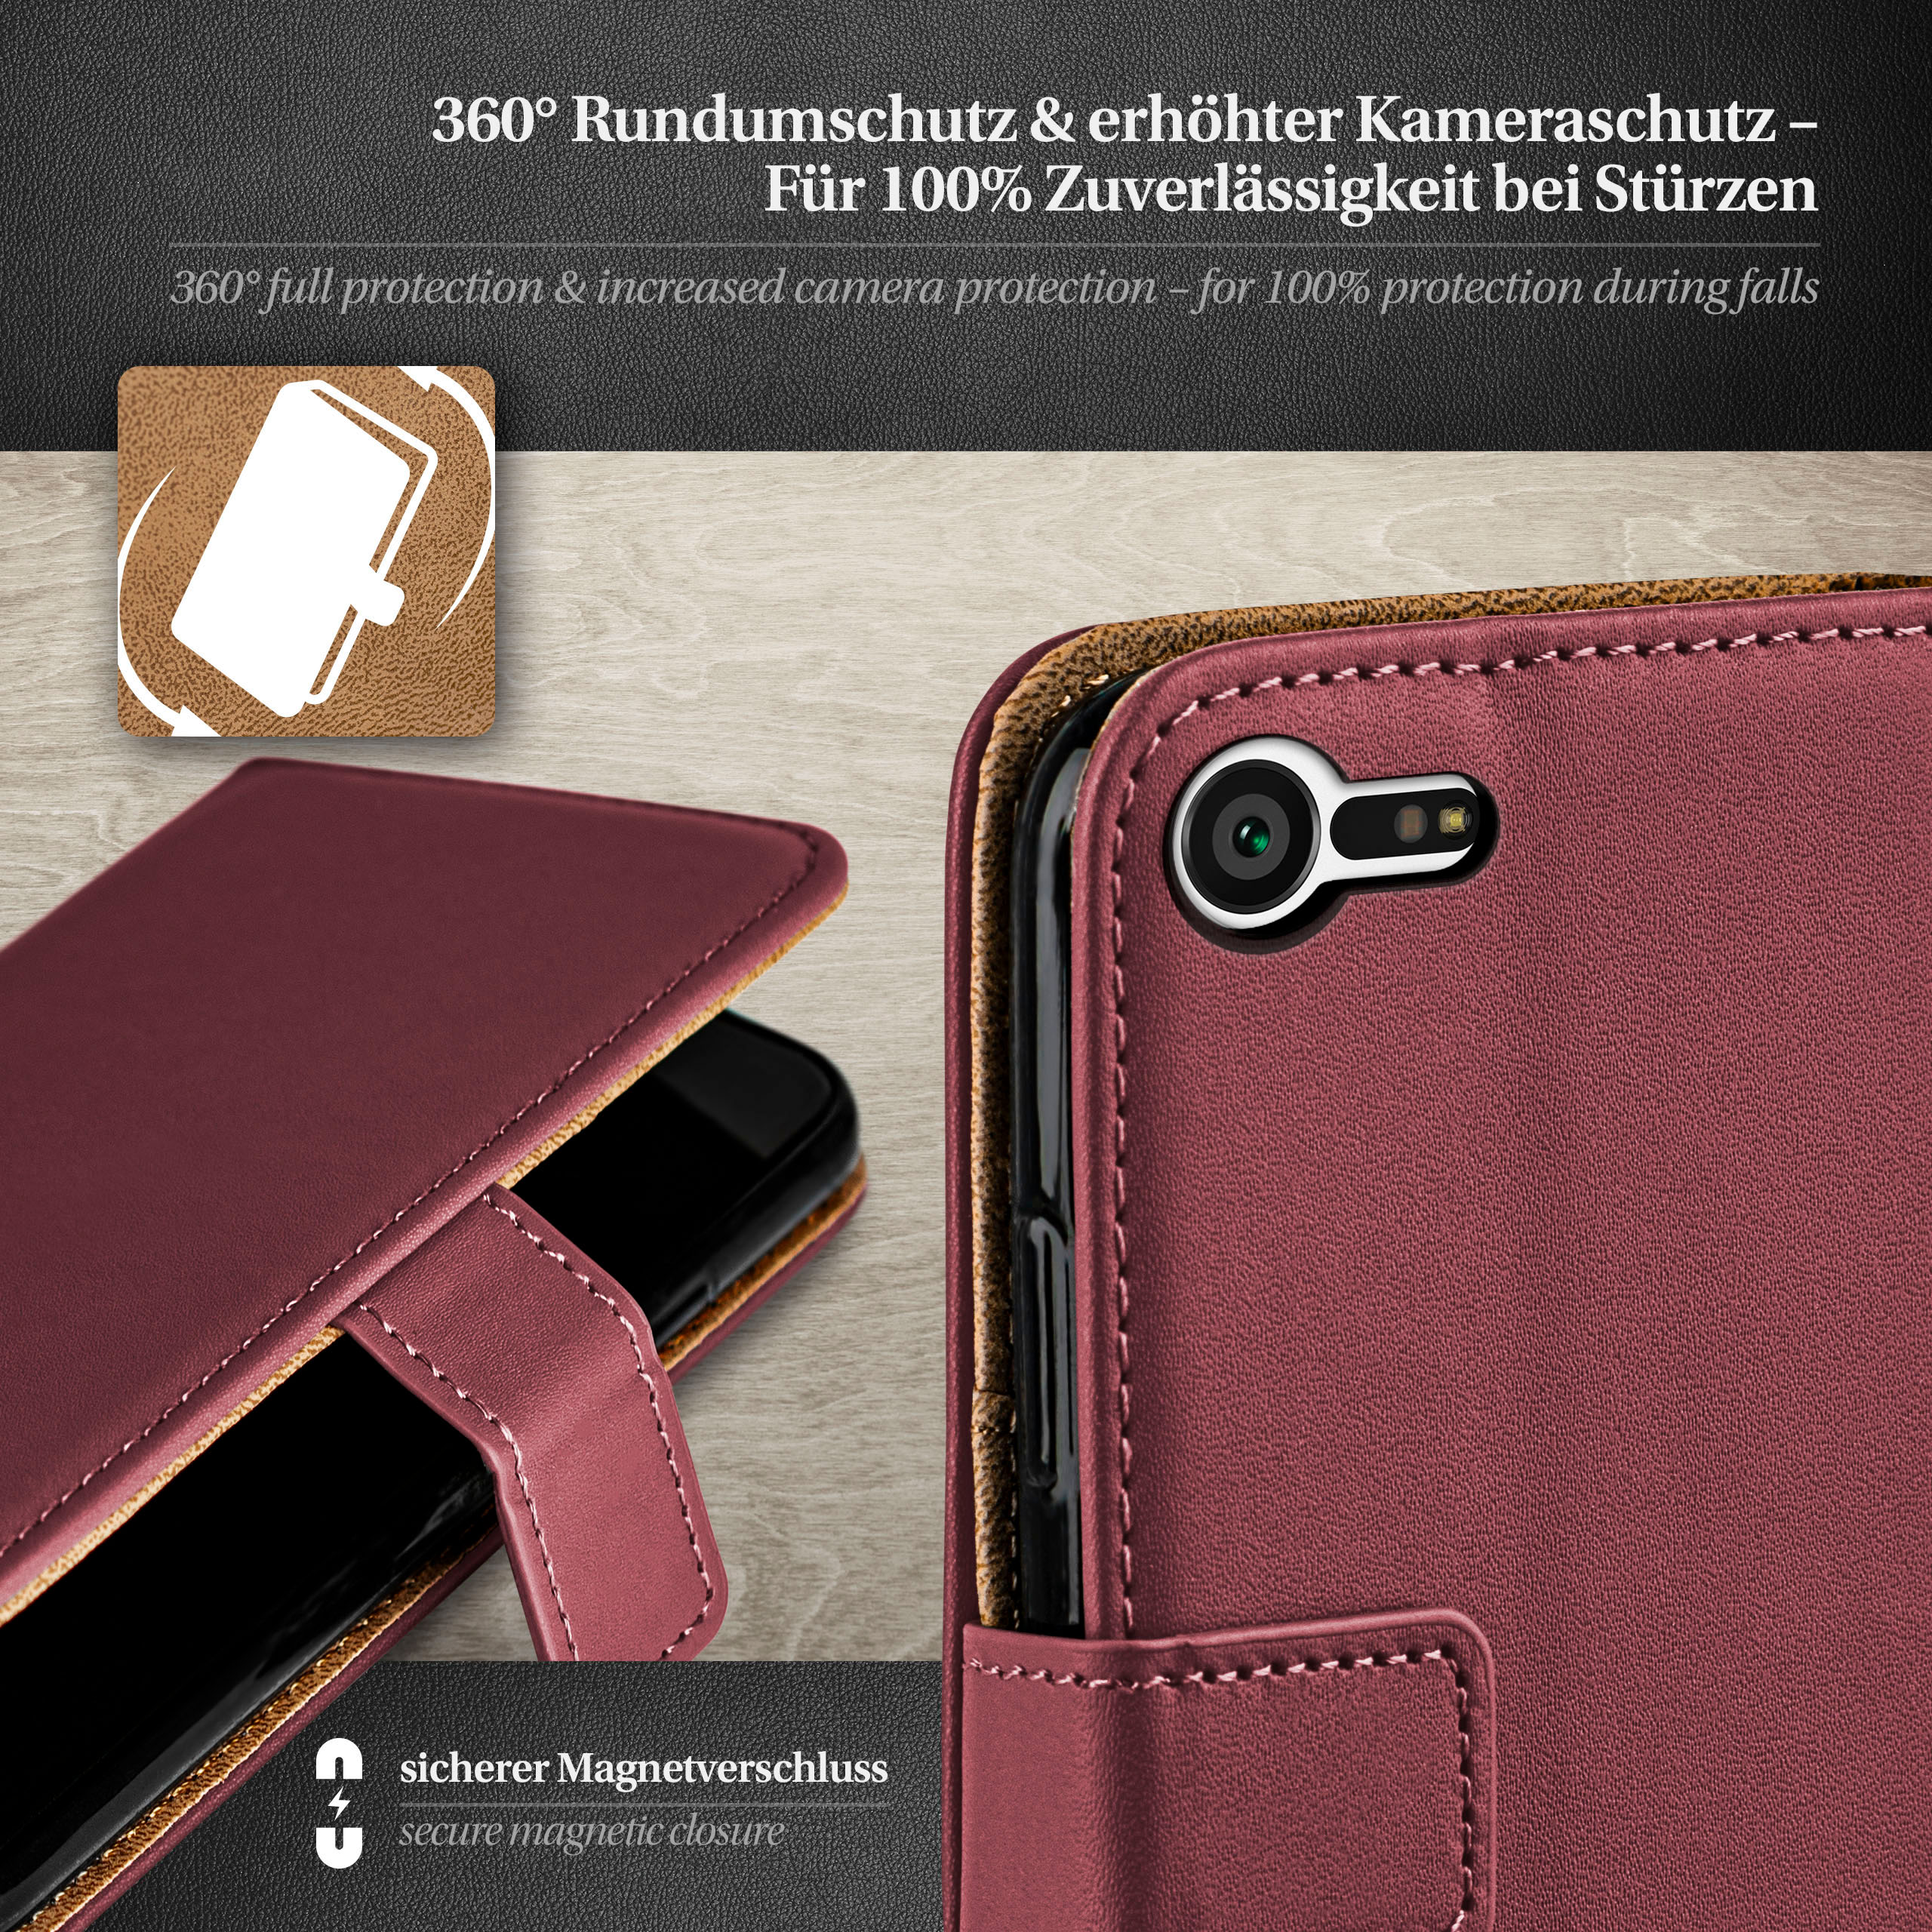 X Compact, Bookcover, Sony, Book Maroon-Red MOEX Xperia Case,